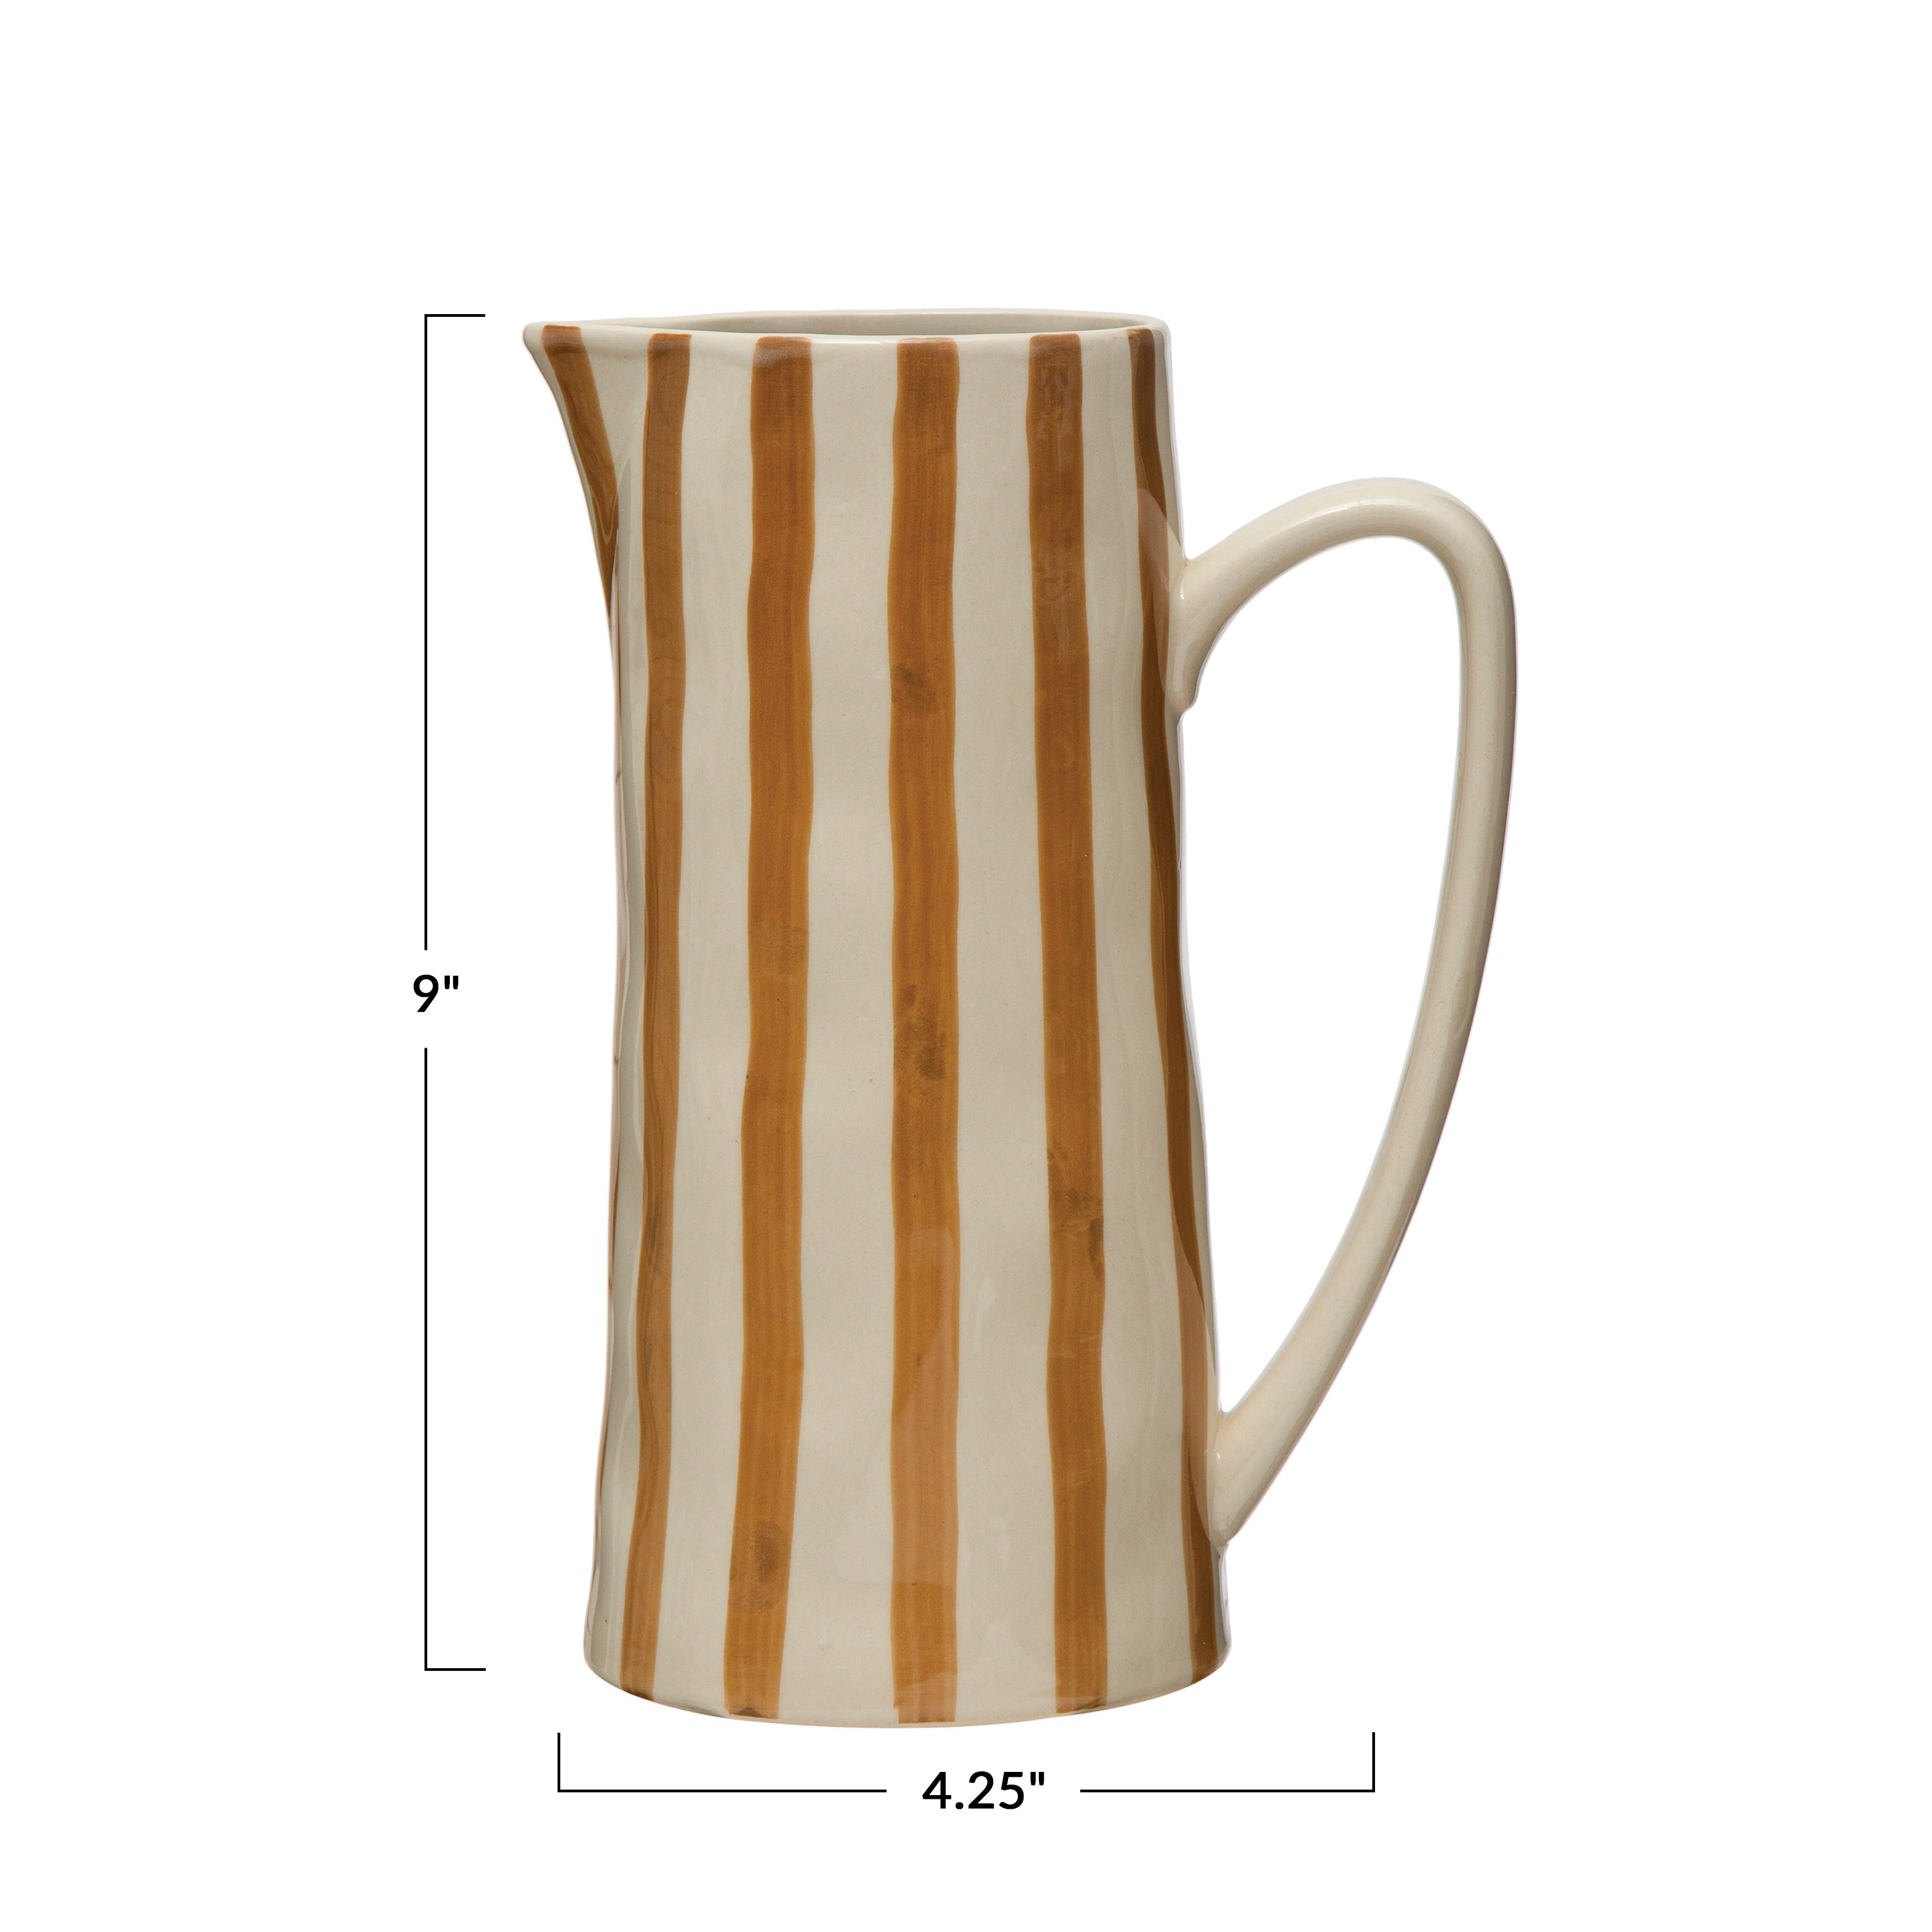 Hand-Painted Stoneware Pitcher with Stripes - 7.1"L x 4.4"W x 9.0"H